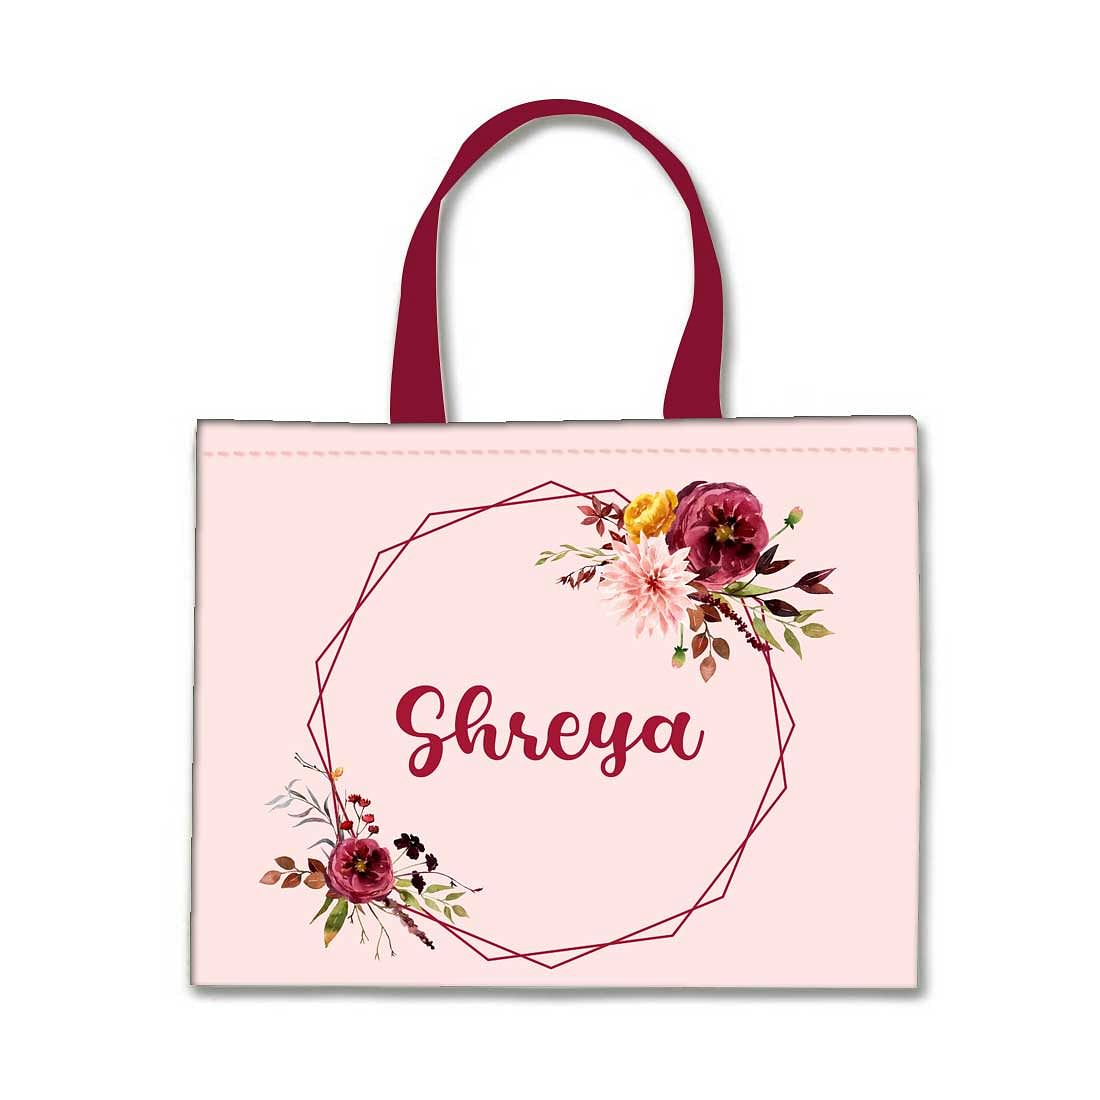 Nutcase Personalized Tote Bag for Women Gym Beach Travel Shopping Fashion Bags with Zip Closure and Internal Pocket to keep cash/valuables - Floral art Nutcase